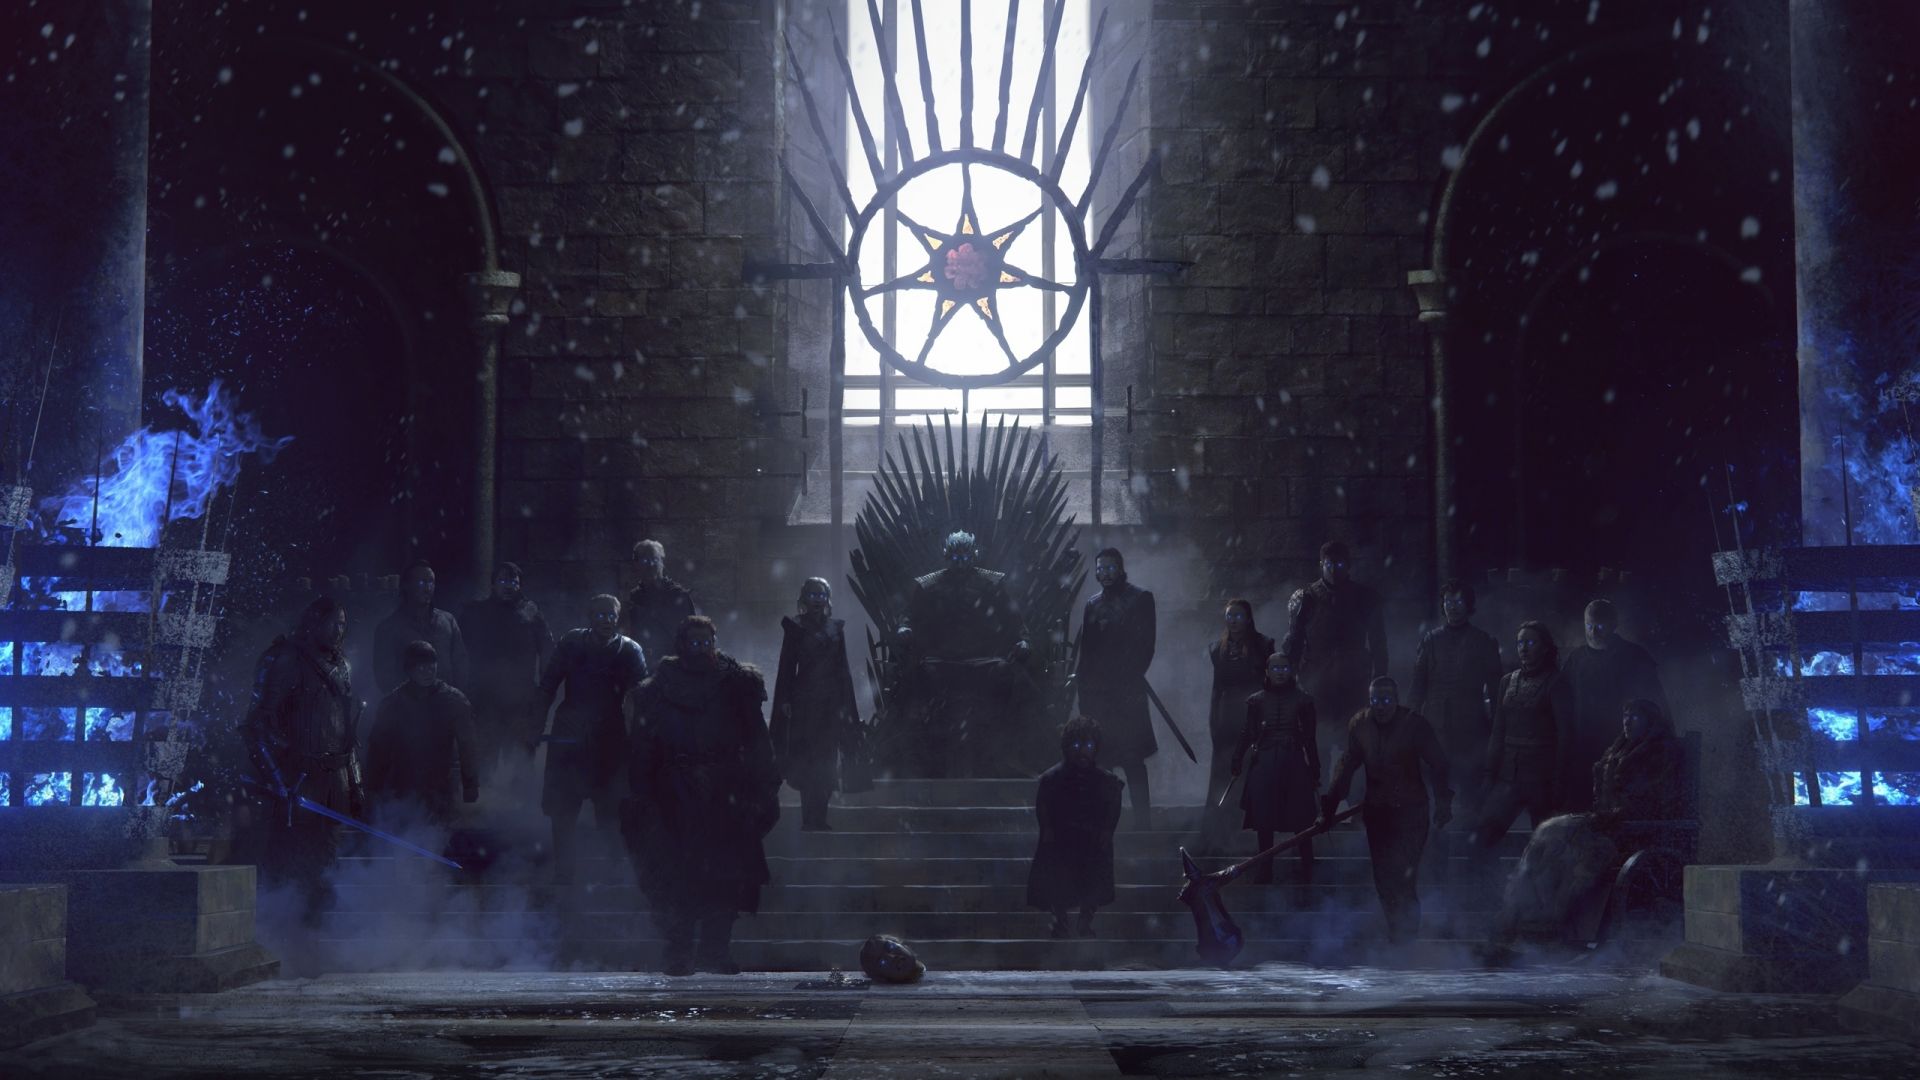 Wallpaper game of thrones, zombies army, night king, art desktop wallpaper, HD image, picture, background, da29c8